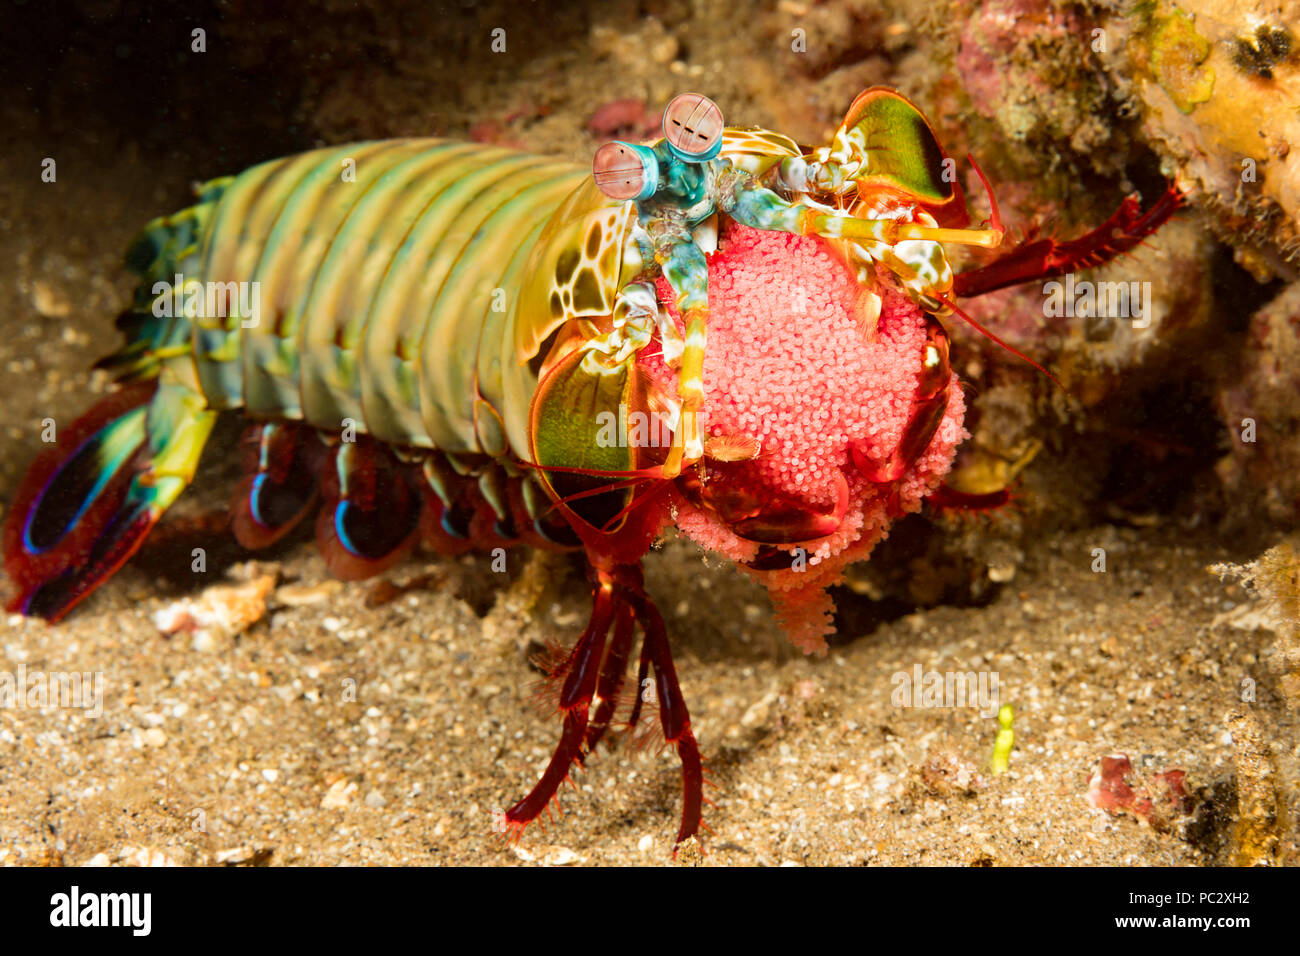 A peacock mantis shrimp, Odontodactylus scyllarus, carrying a bright red egg mass, Philippines. Stock Photo